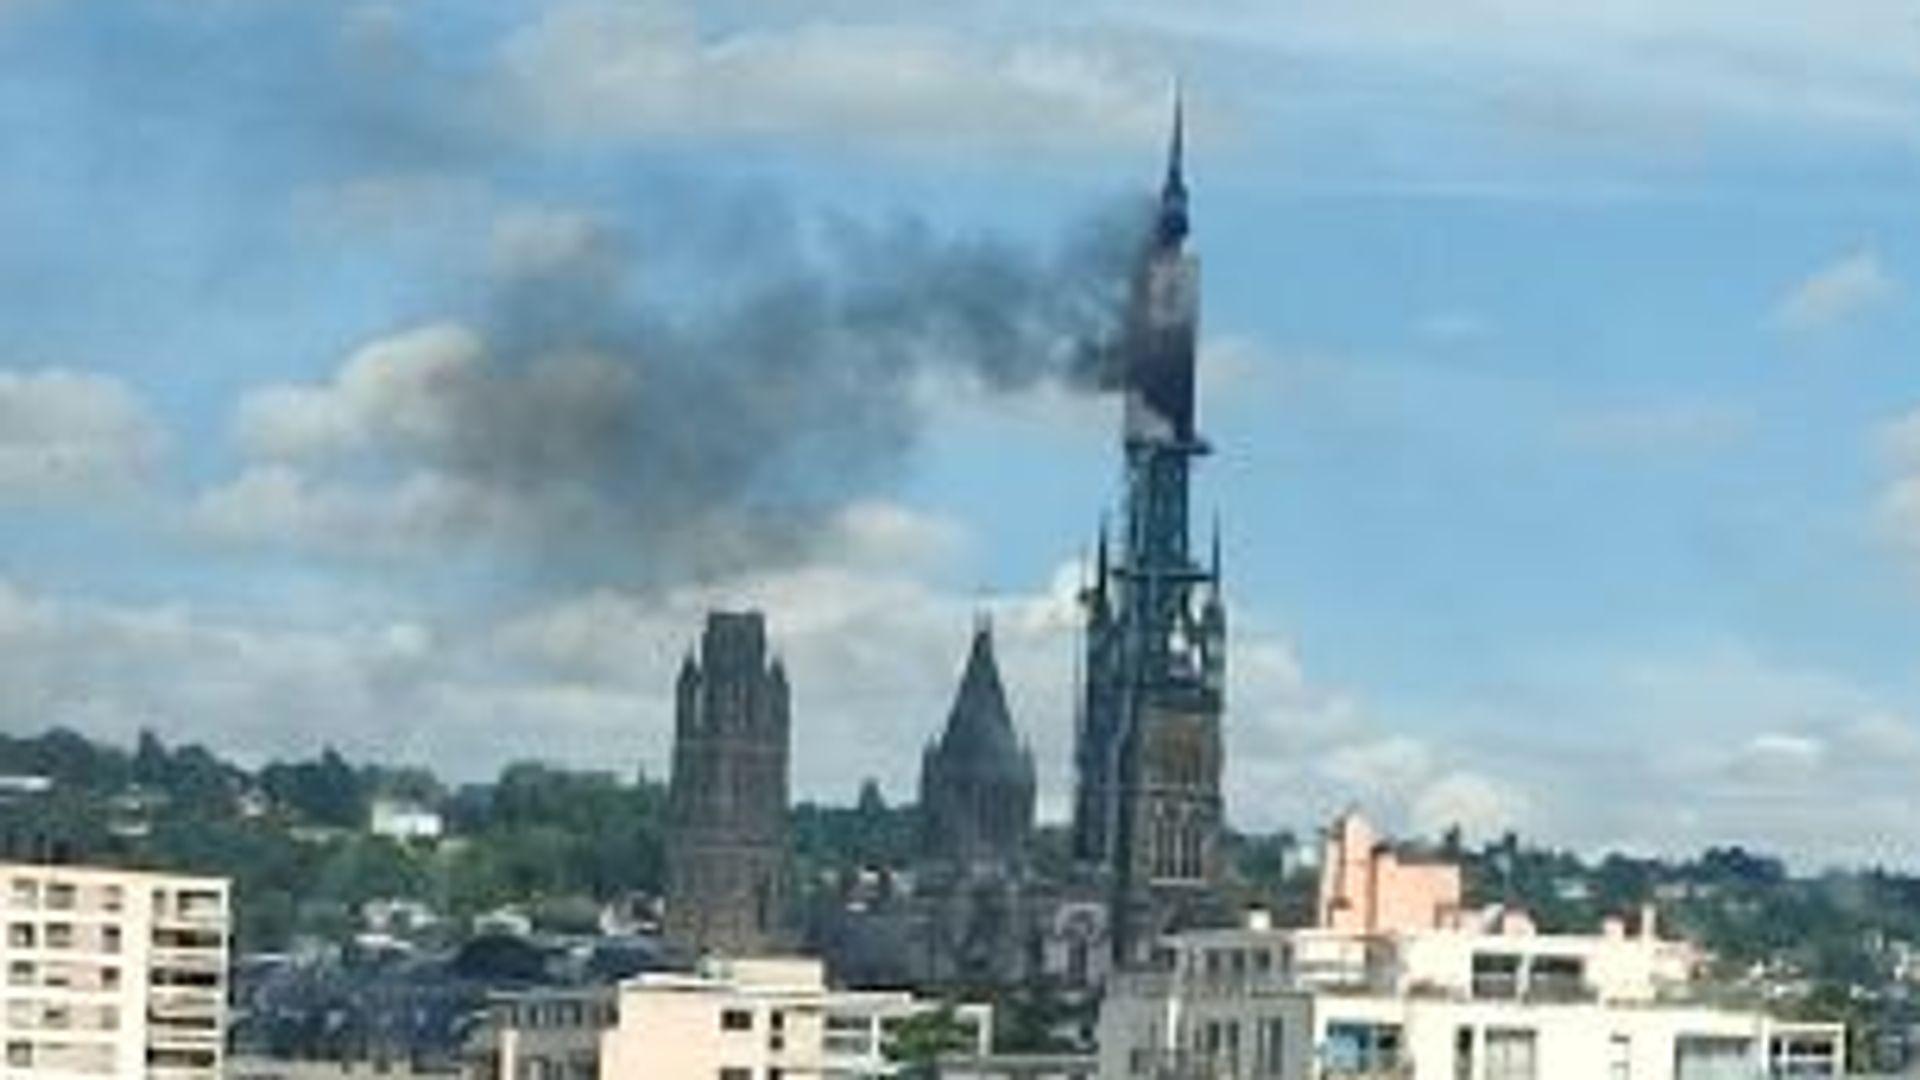 Spire of famous French cathedral on fire